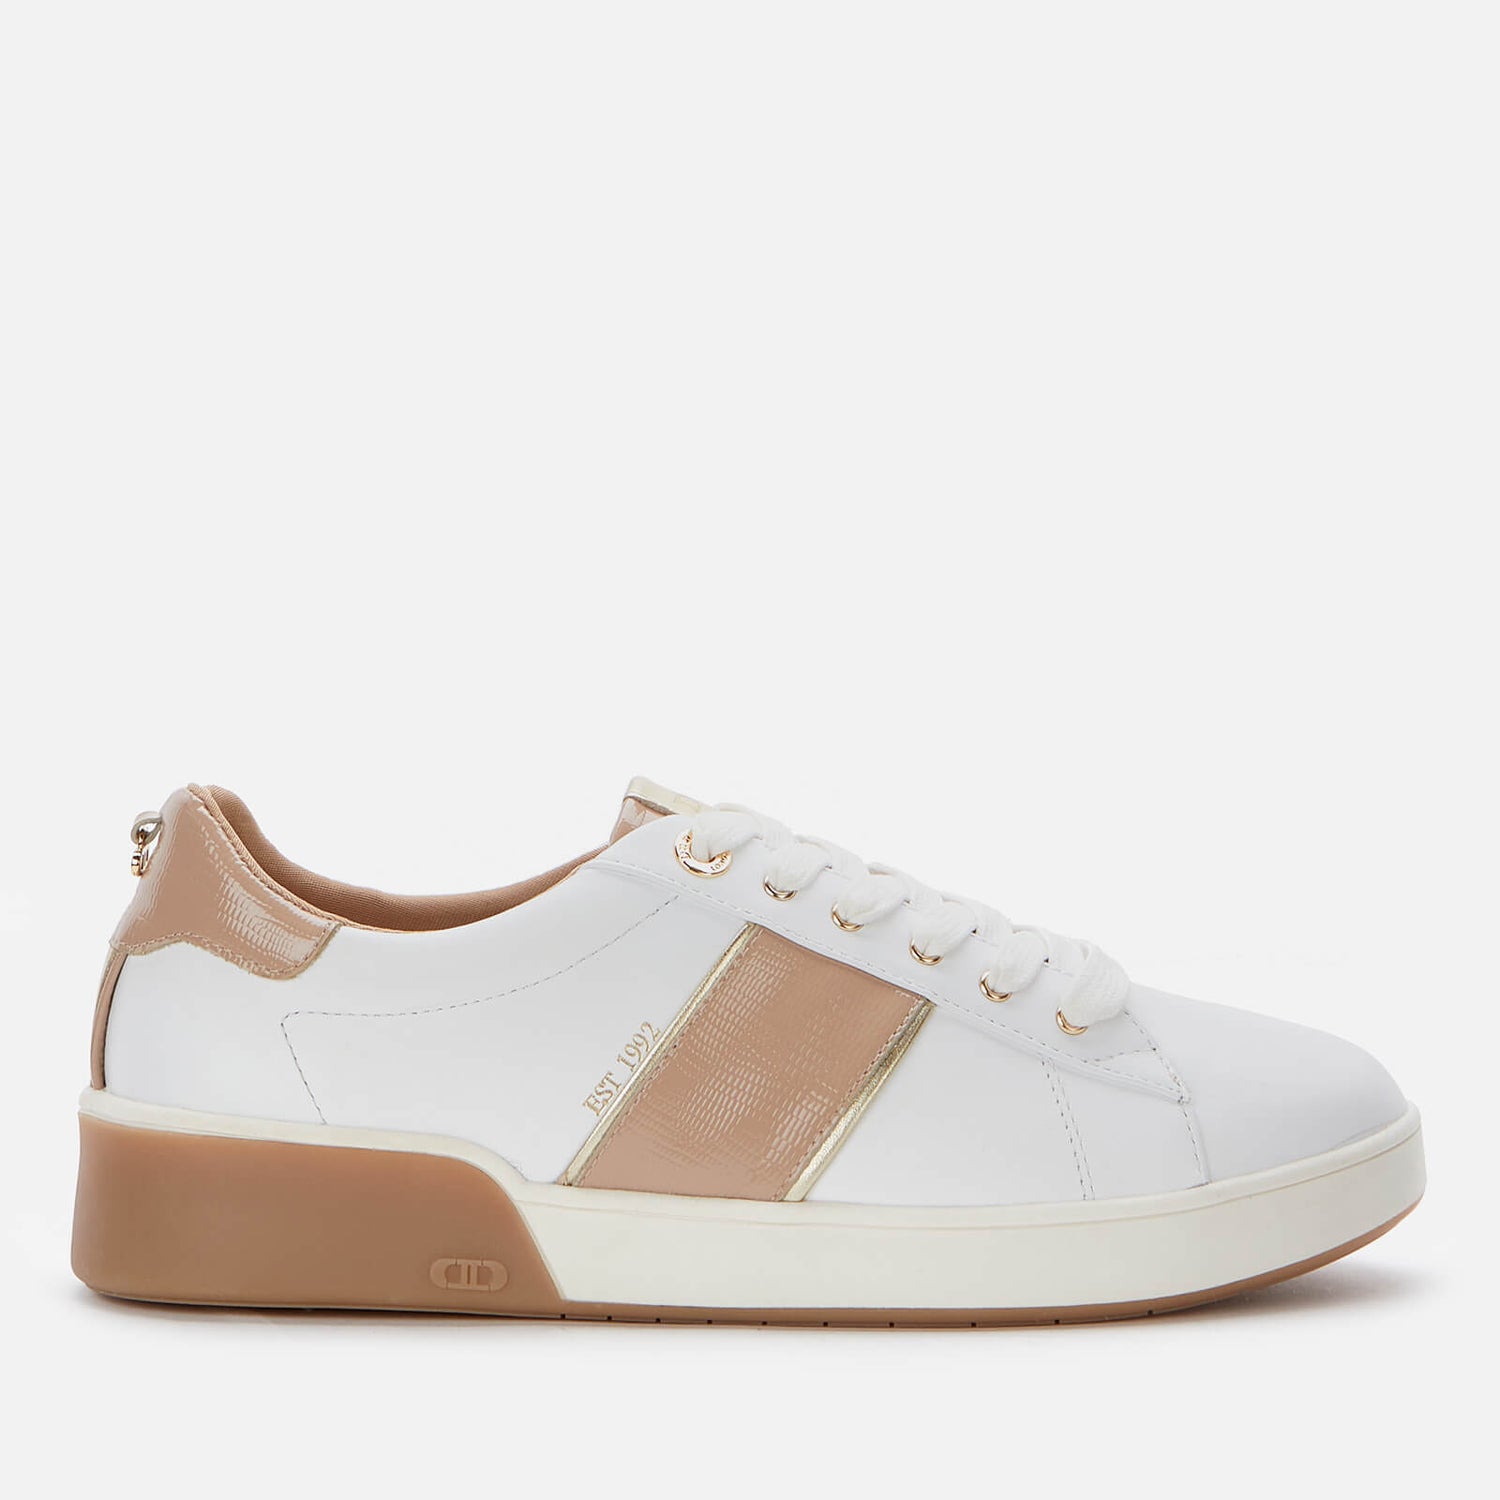 Dune Women's Eden Leather Low Top Trainers - White